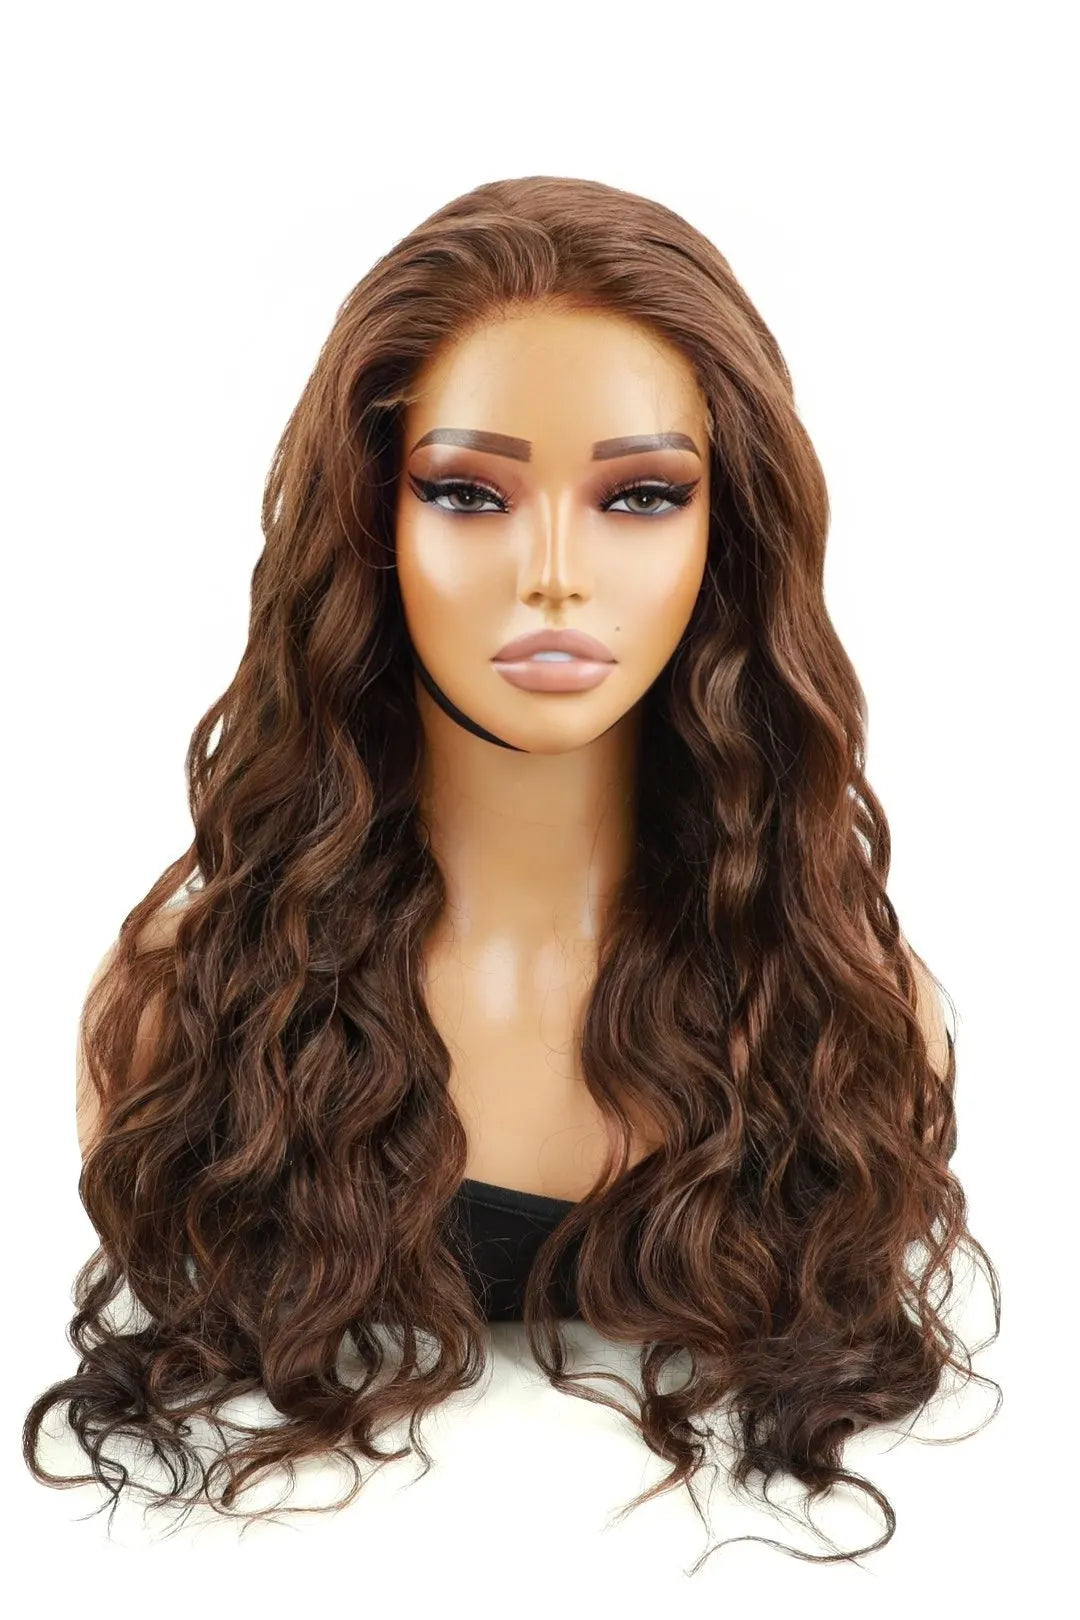 Front view of beautiful model with brown curly hair